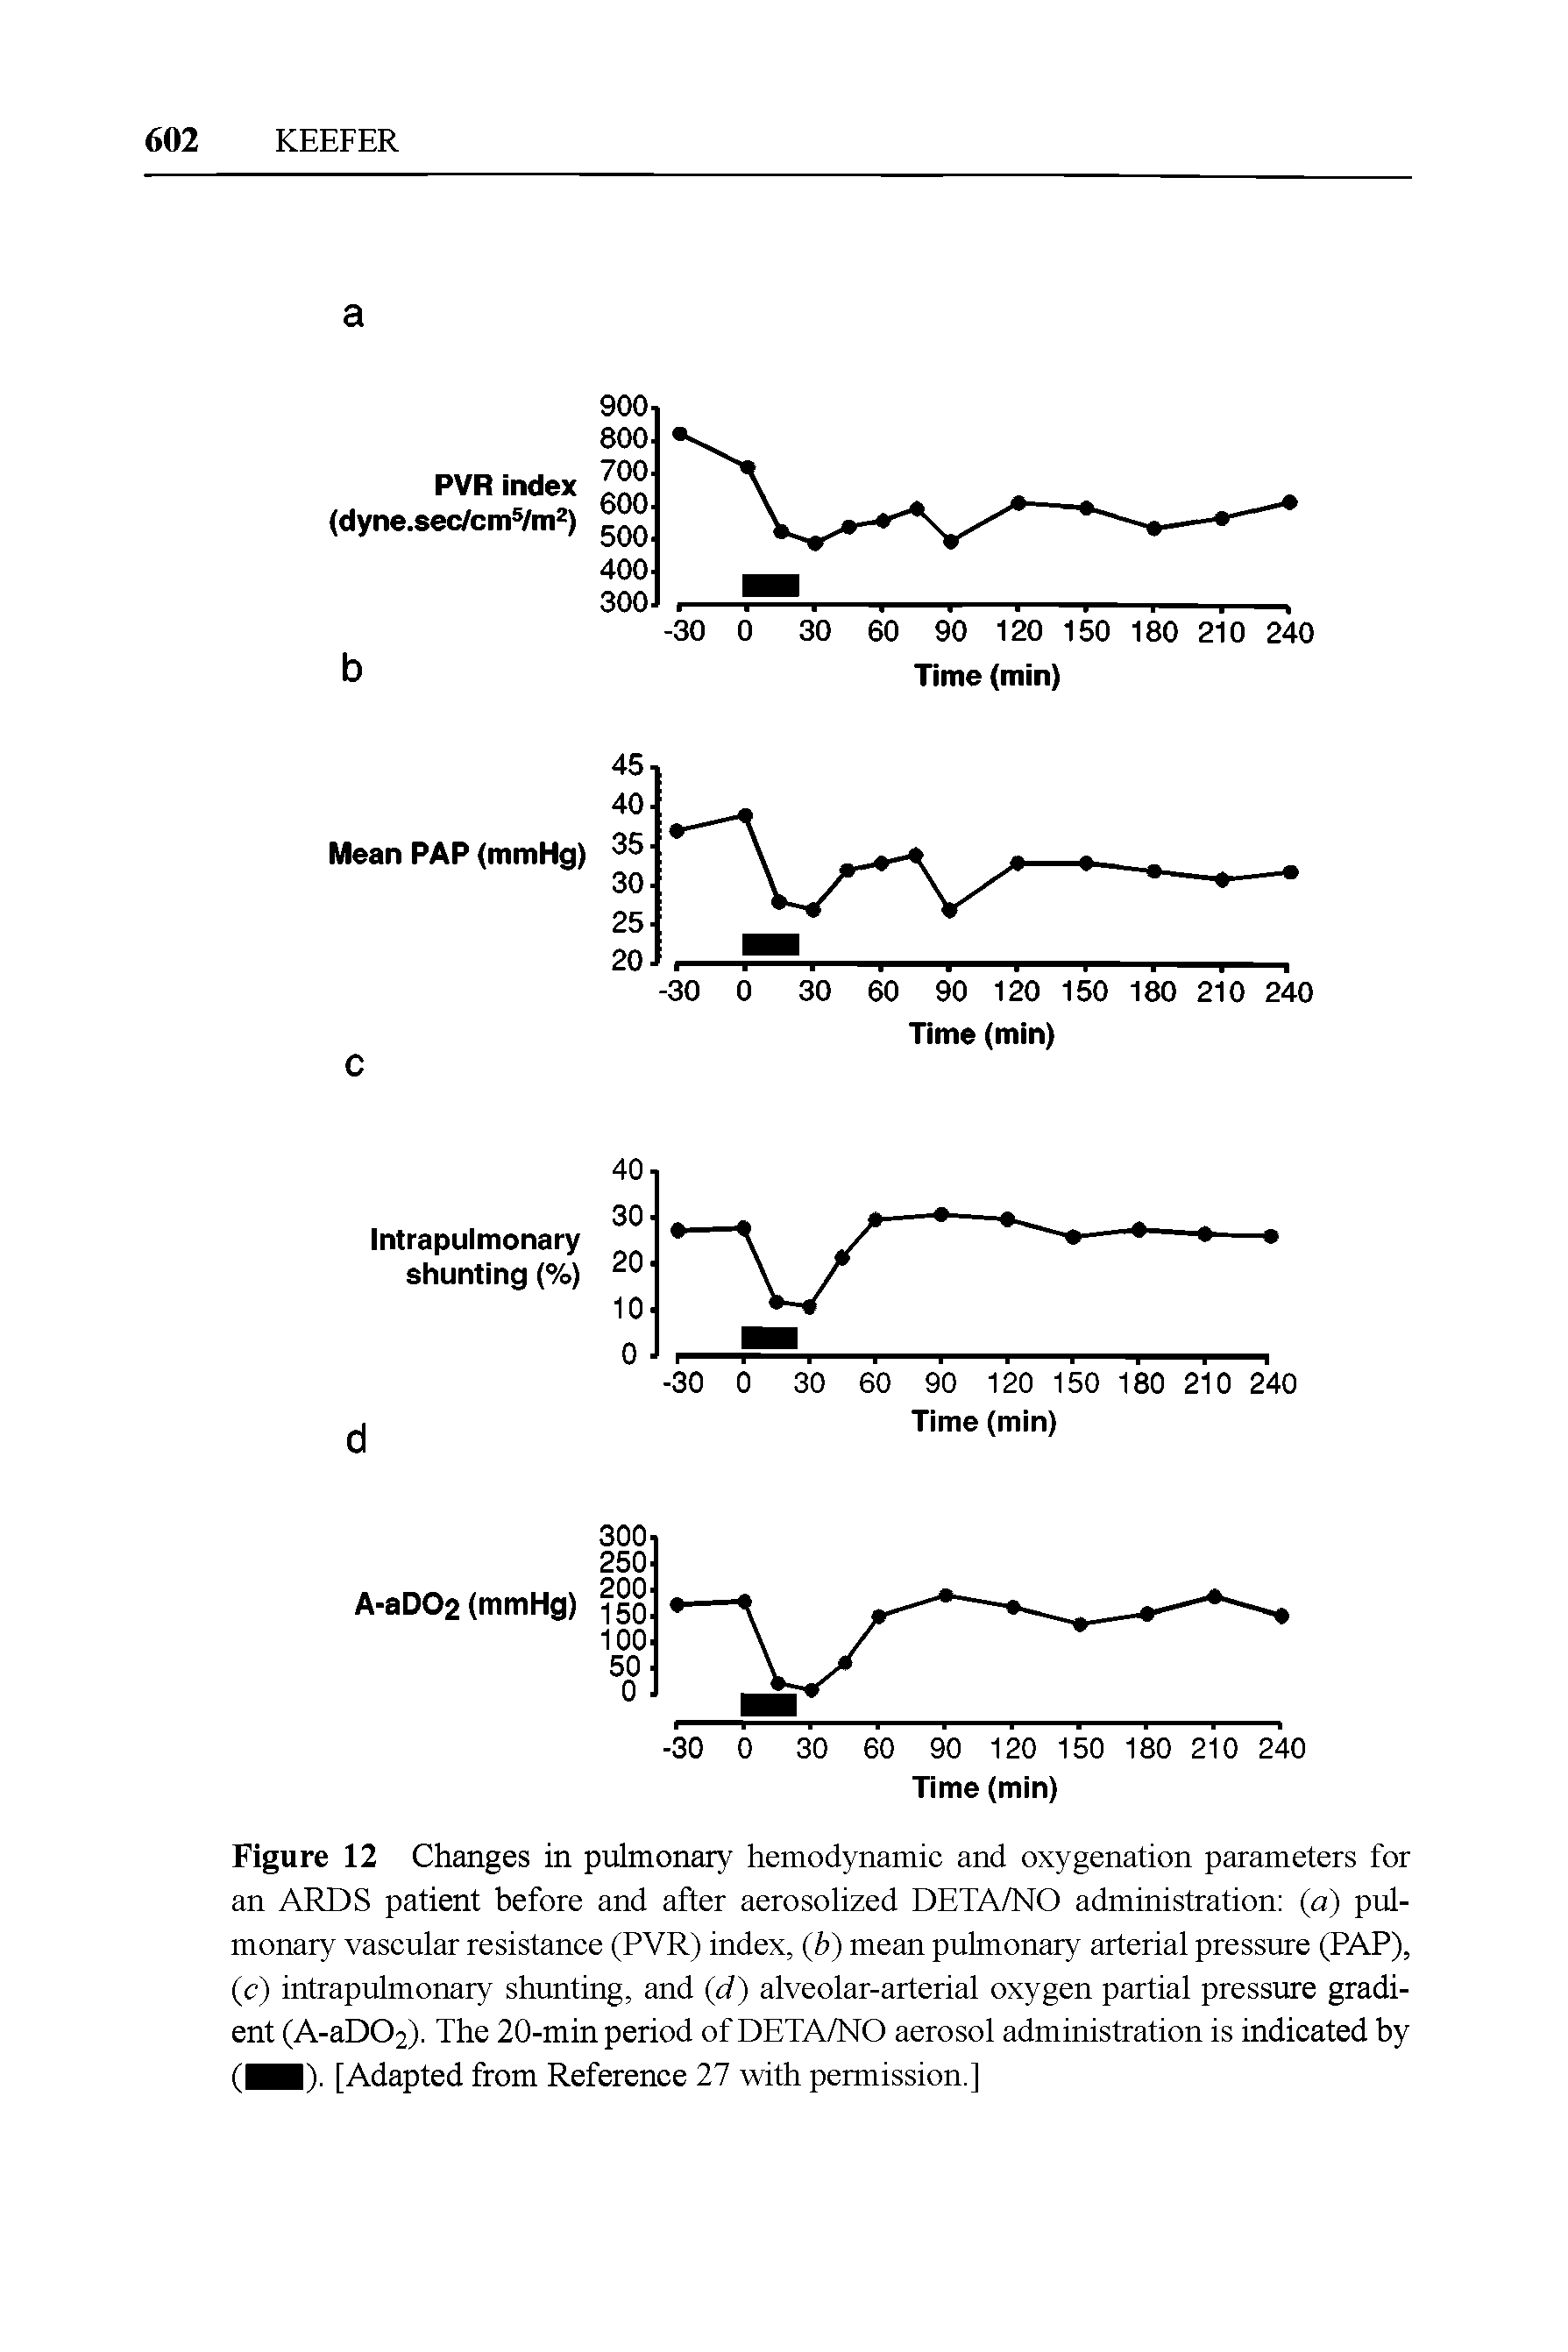 Figure 12 Changes in pulmonary hemodynamic and oxygenation parameters for an ARDS patient before and after aerosolized DETA/NO administration (a) pulmonary vascular resistance (PVR) index, (b) mean pulmonary arterial pressure (PAP), (c) intrapulmonary shunting, and (d) alveolar-arterial oxygen partial pressure gradient (A-aDC>2). The 20-min period of DETA/NO aerosol administration is indicated by ( ). [Adapted from Reference 27 with permission.]...